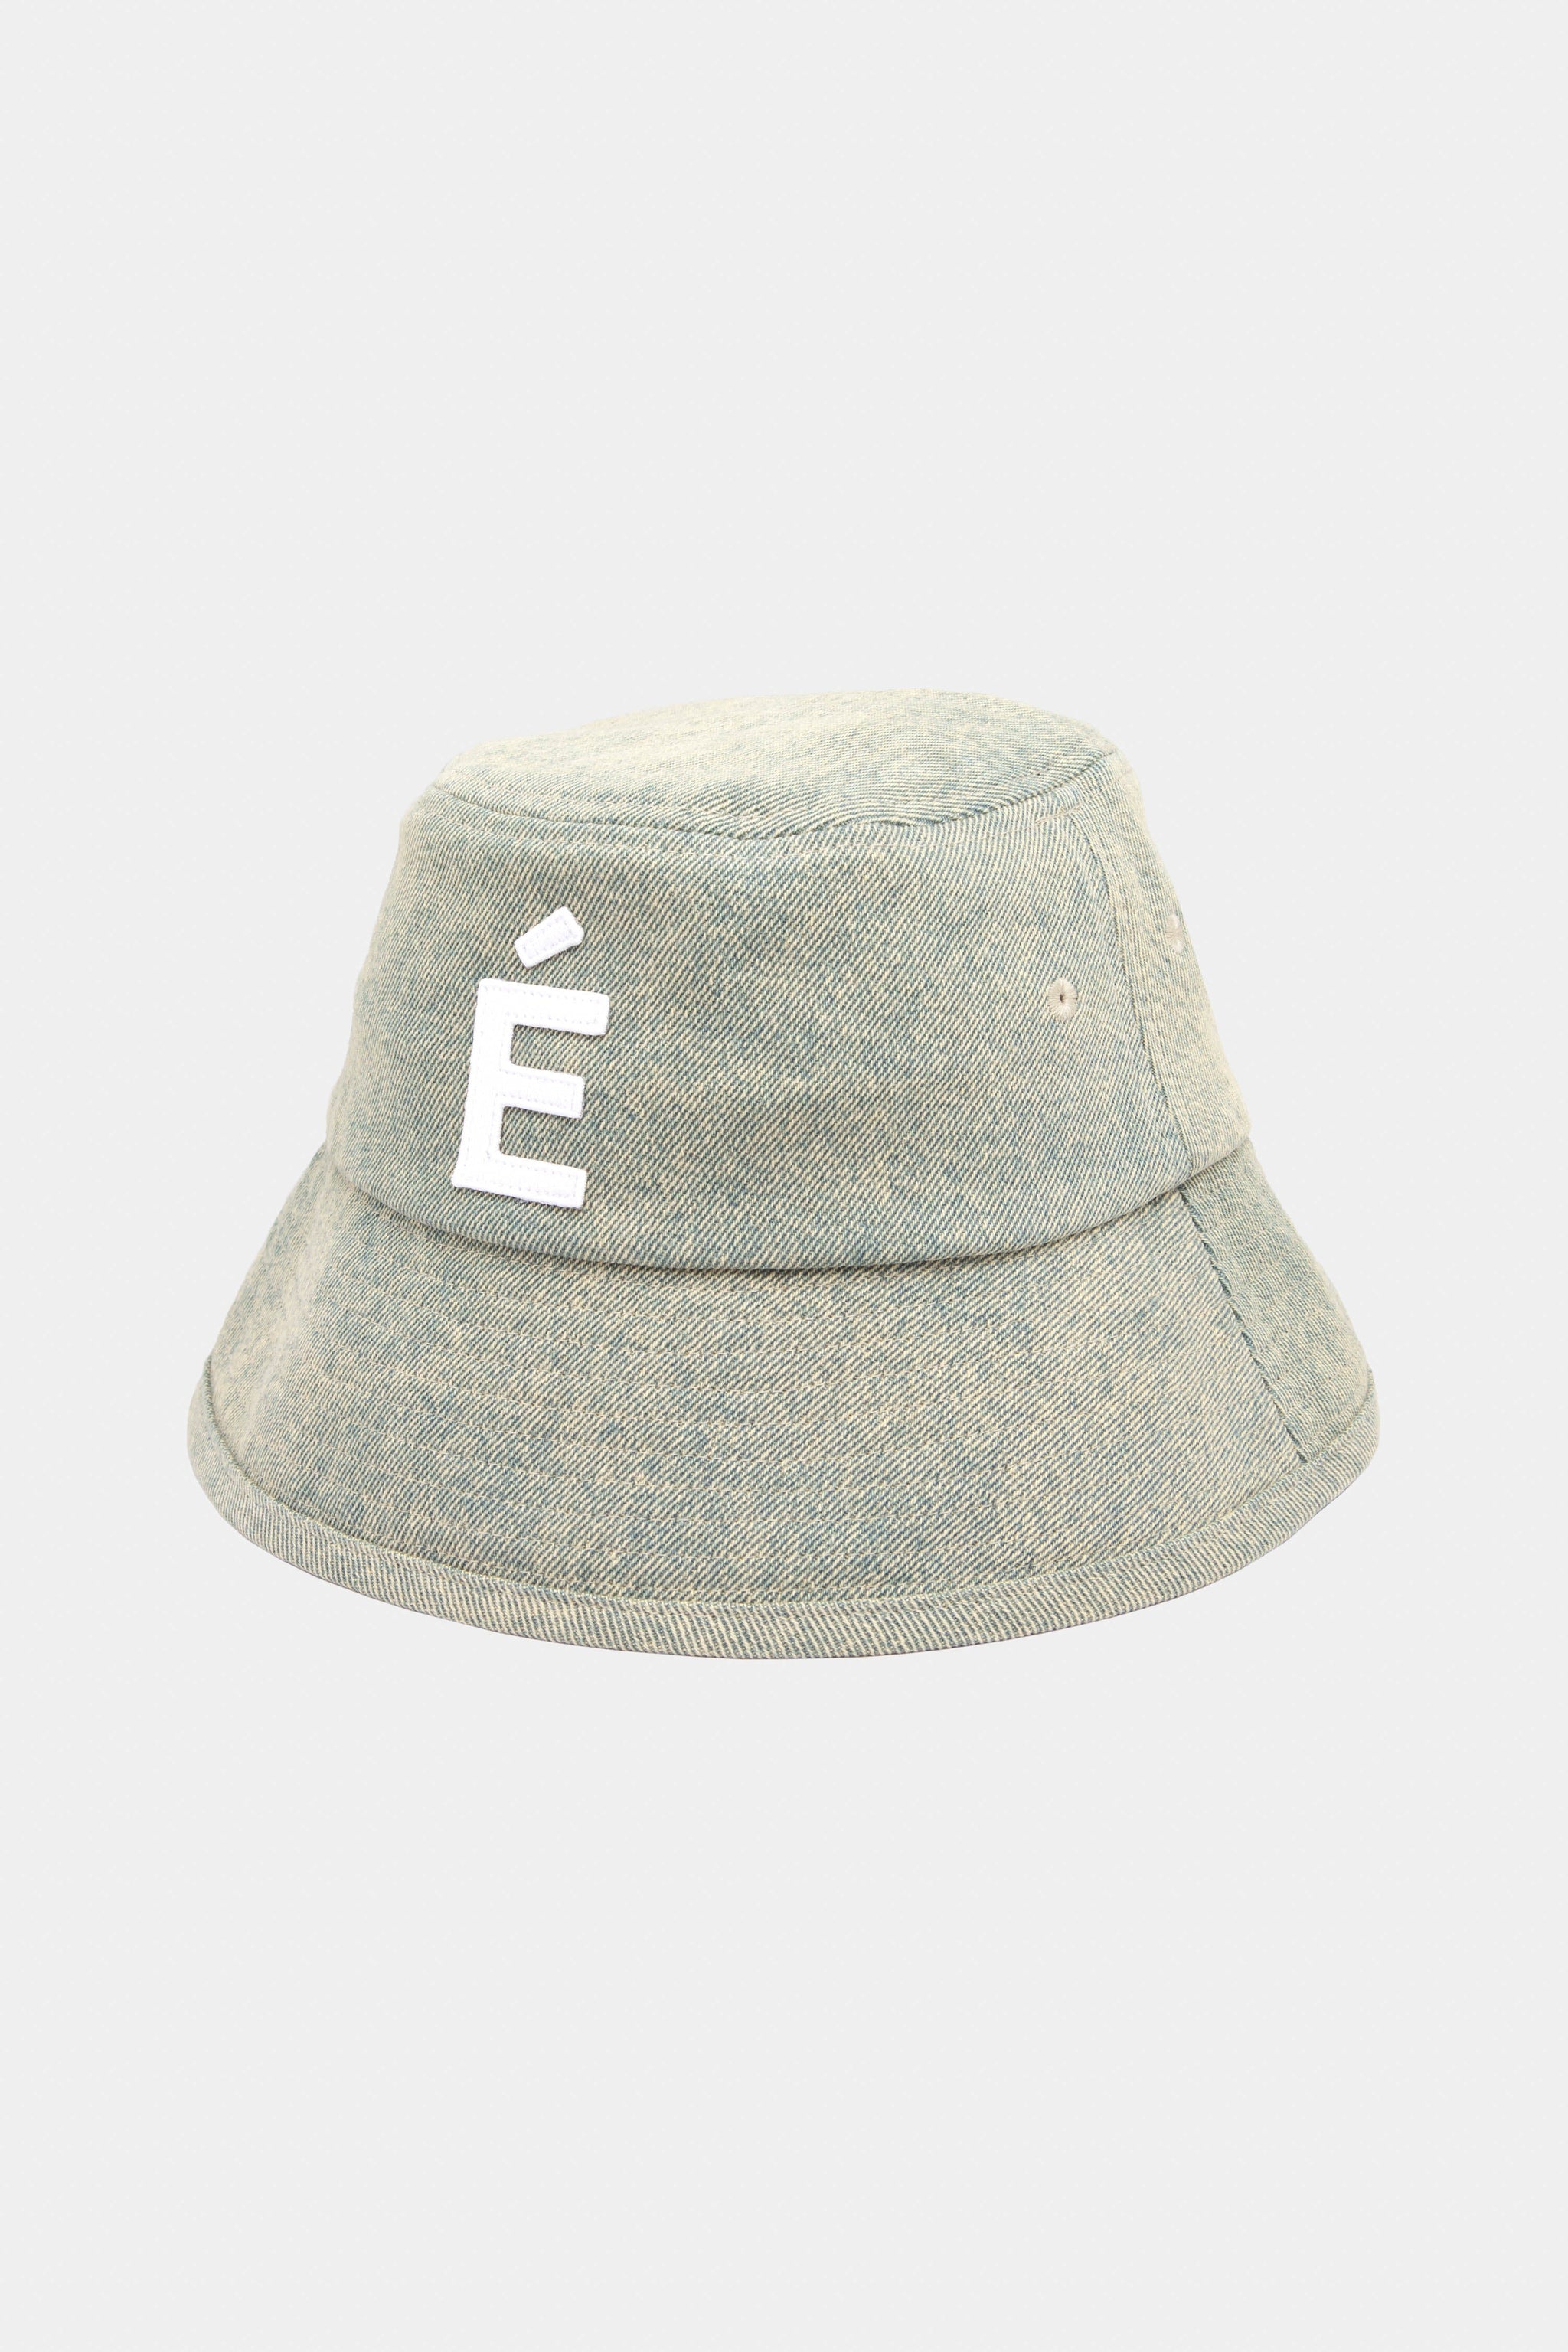 ÉTUDES TRAINING HAT PATCH DYED YELLOW HATS 1